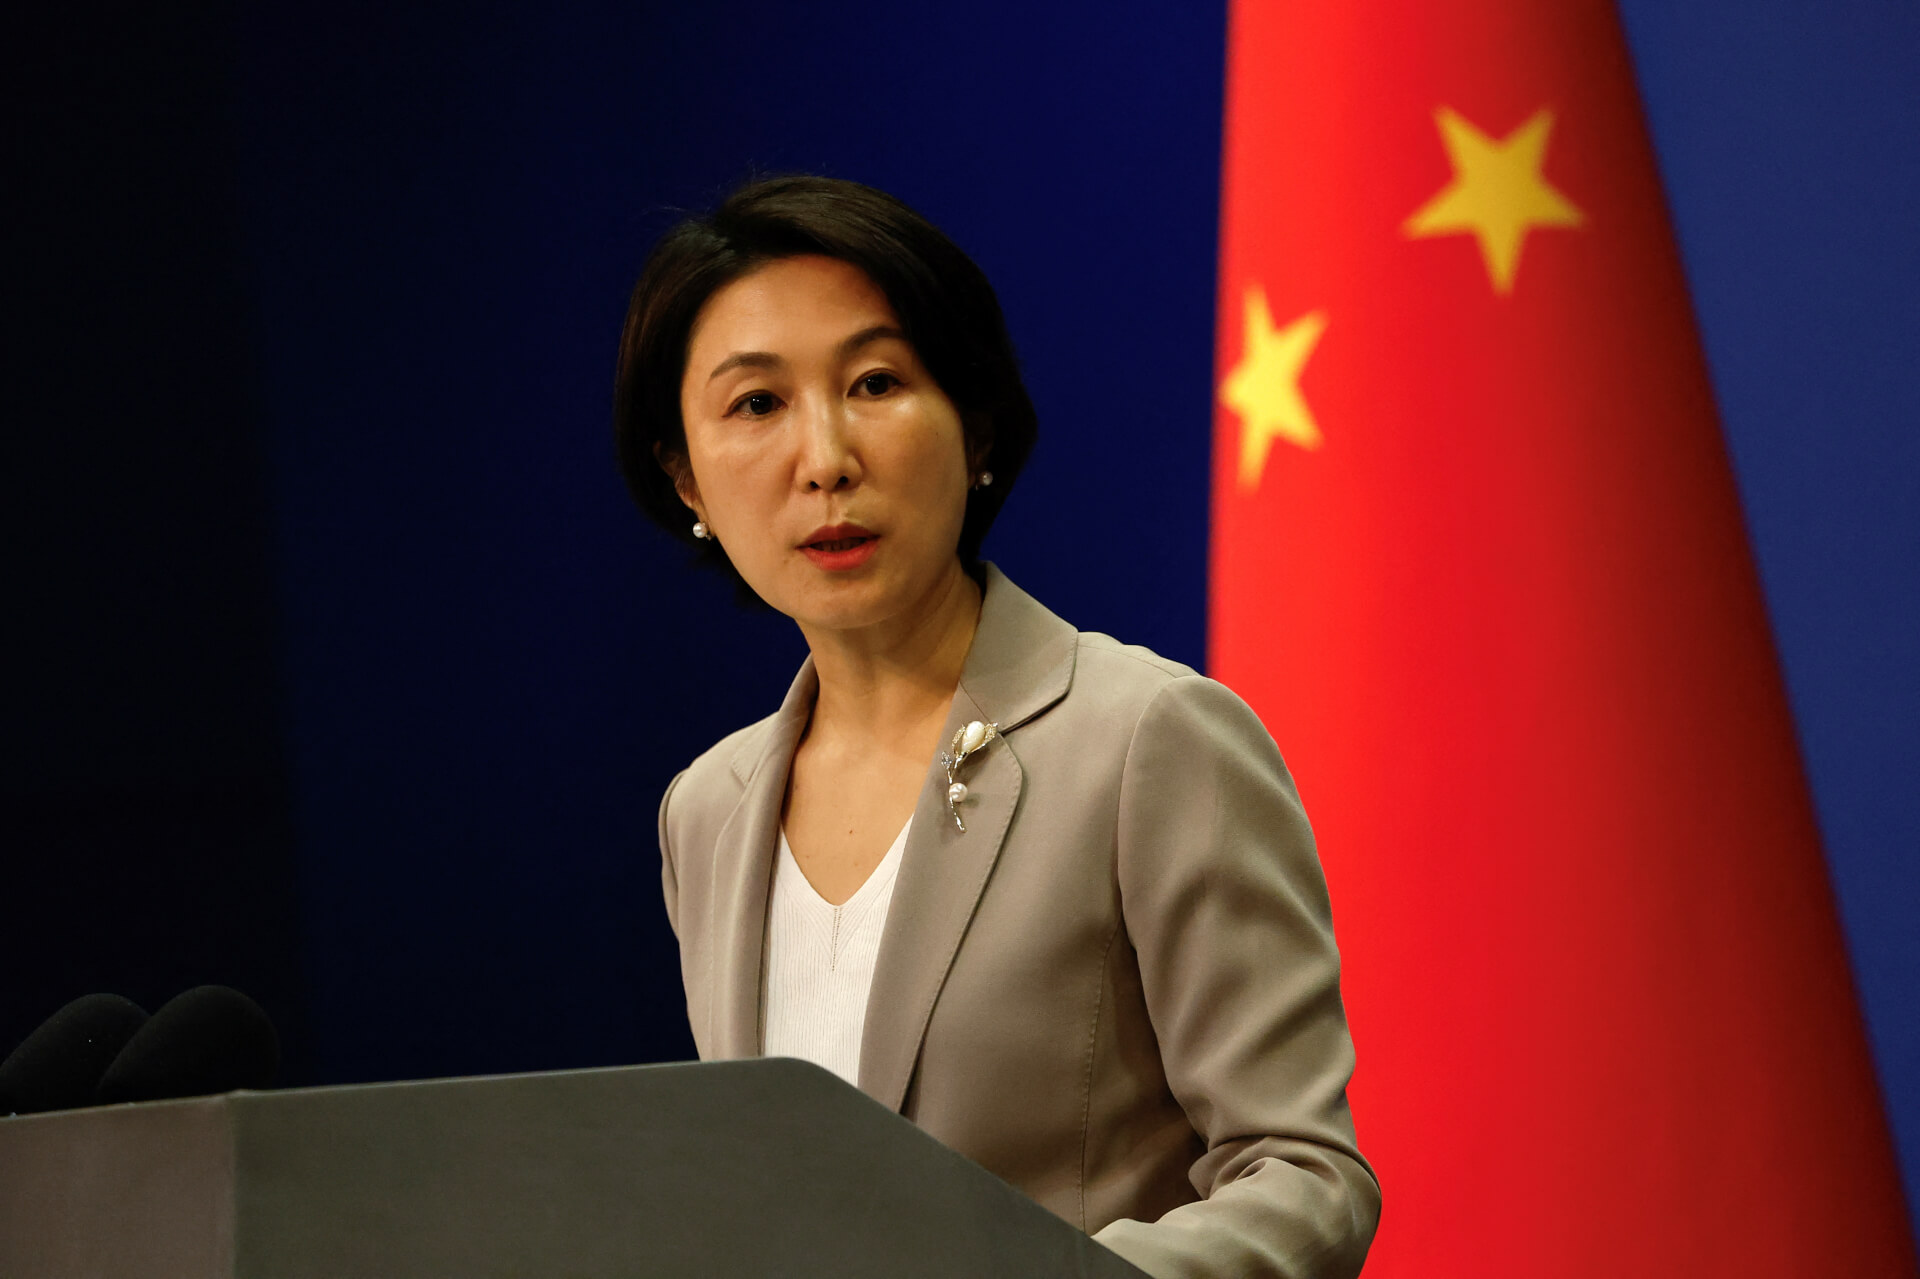 SC Verdict on Article 370 Does Not Affect China’s Claims on Sino-India Border: Chinese Foreign Ministry